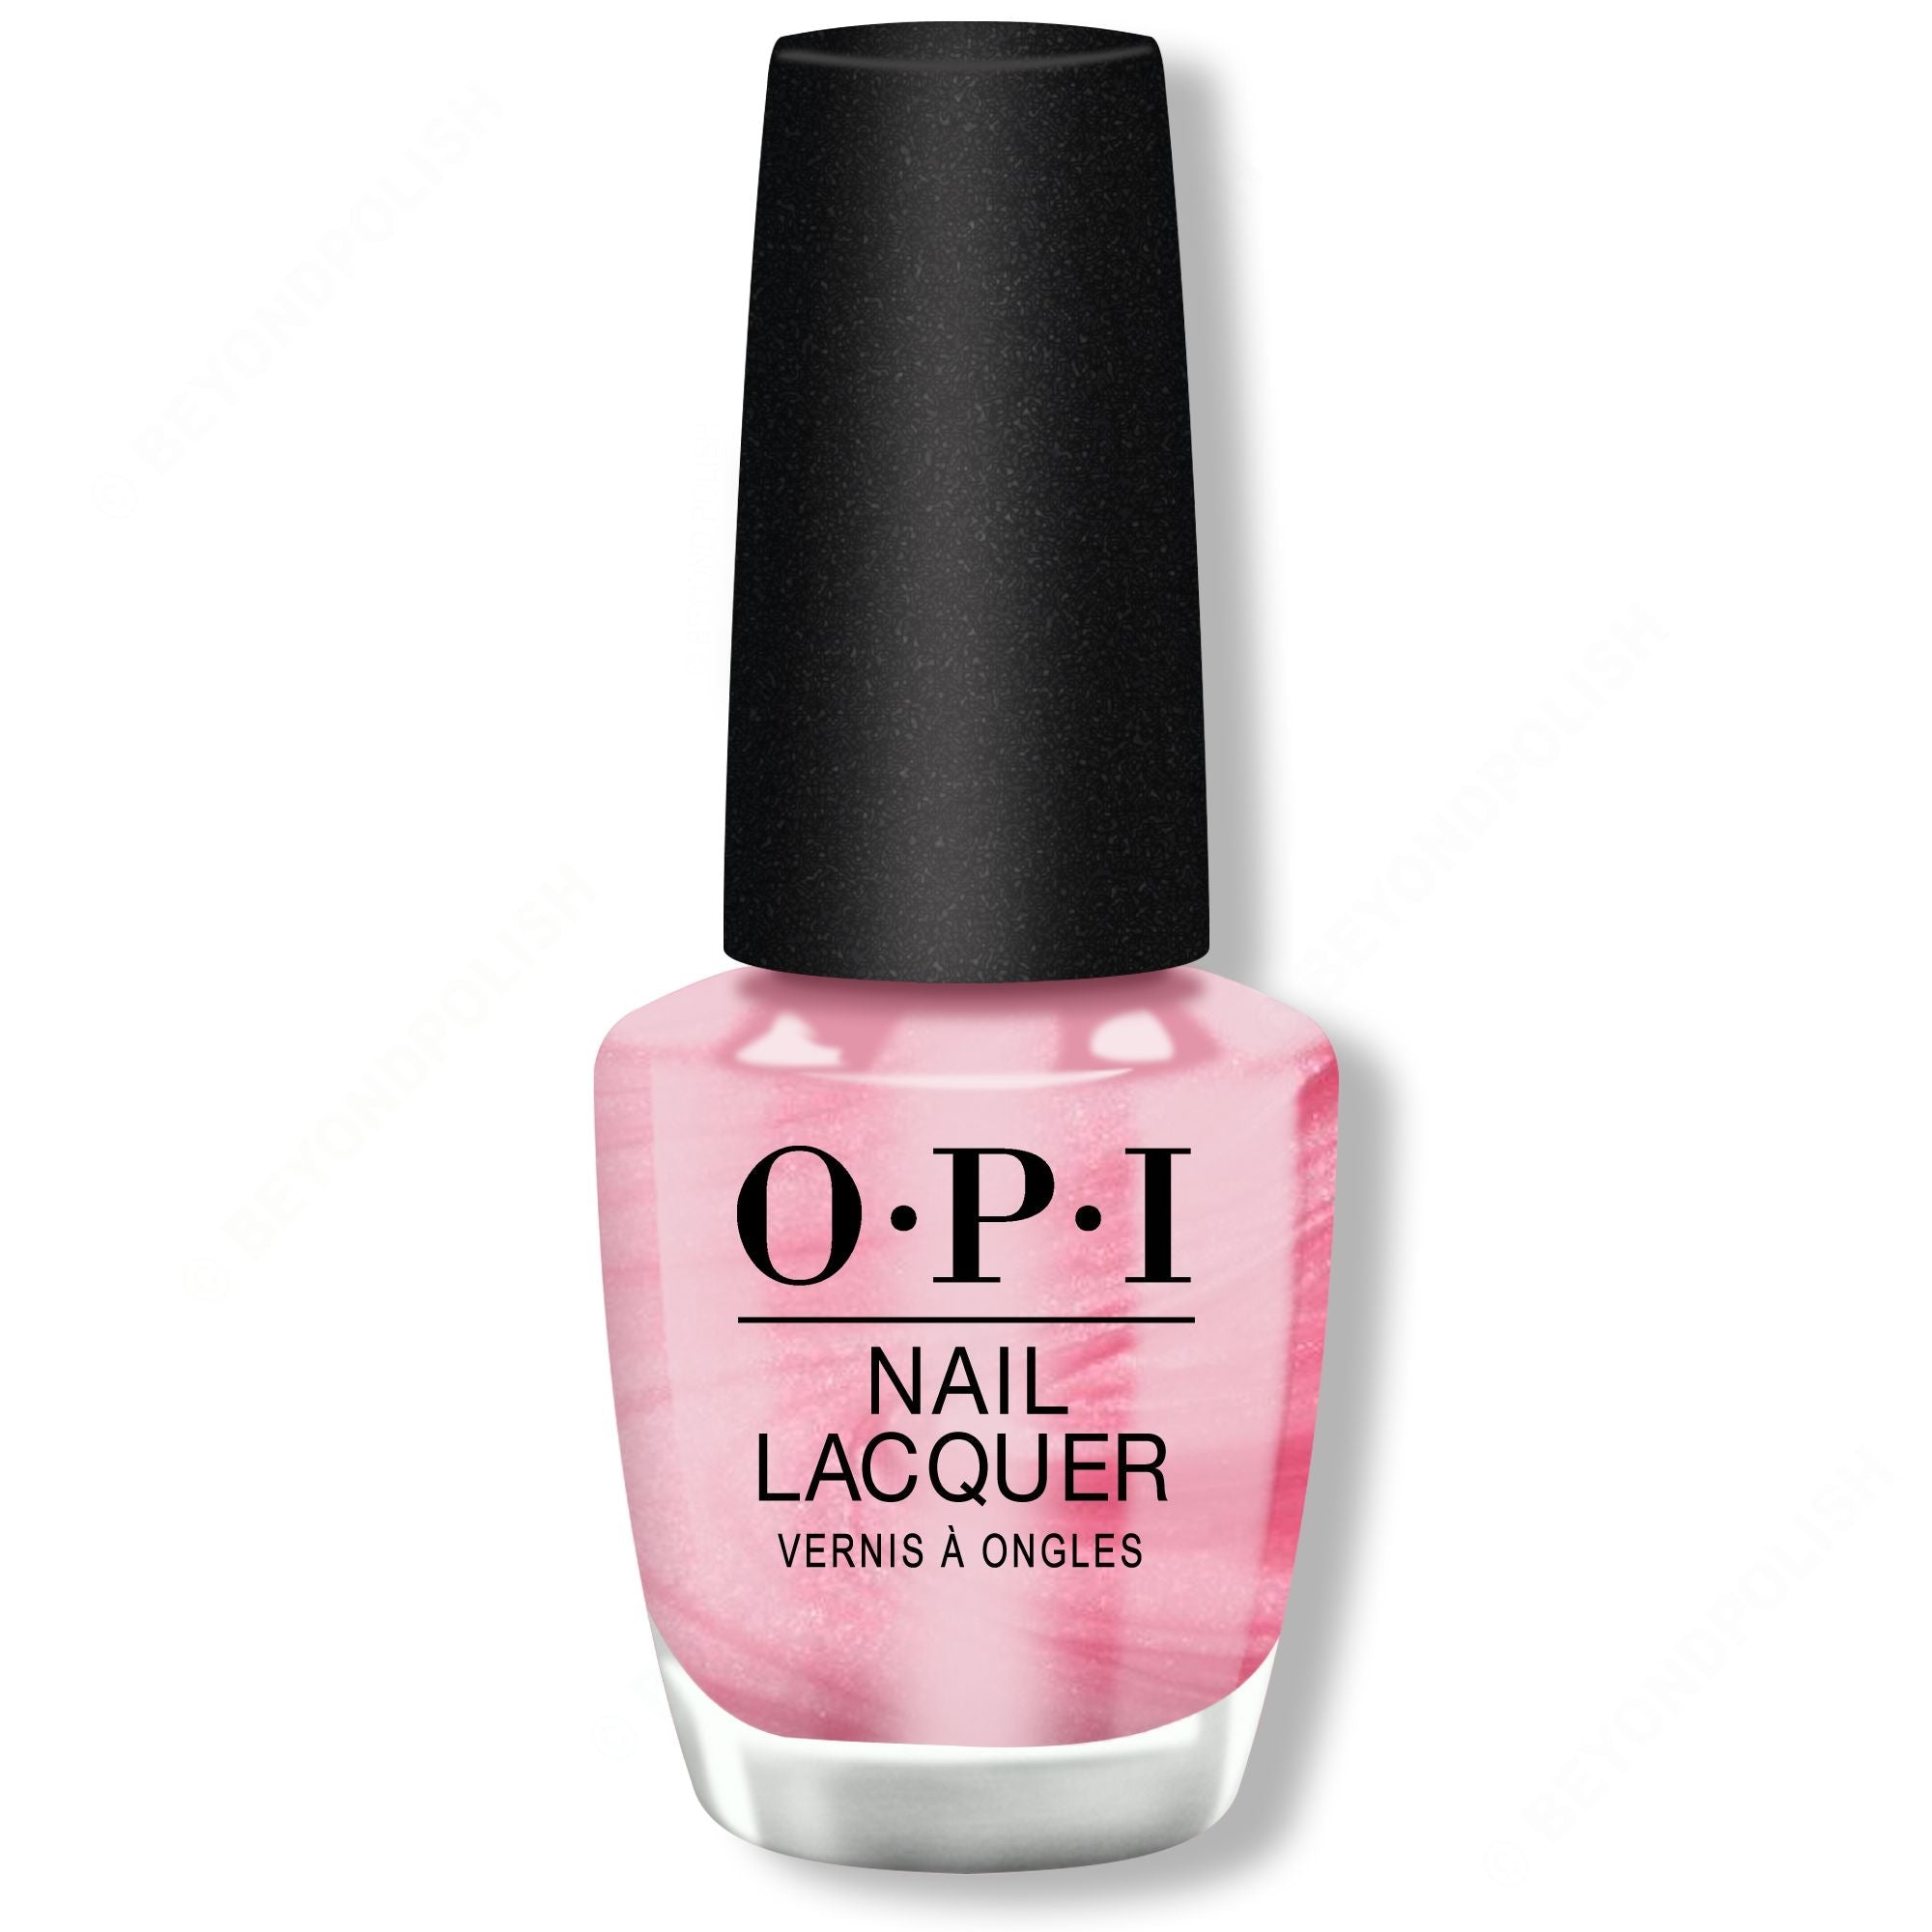 OPI Nail Lacquer - Aphrodite's Pink Nightie 0.5 oz - #NLG01 - Nail Lacquer at Beyond Polish